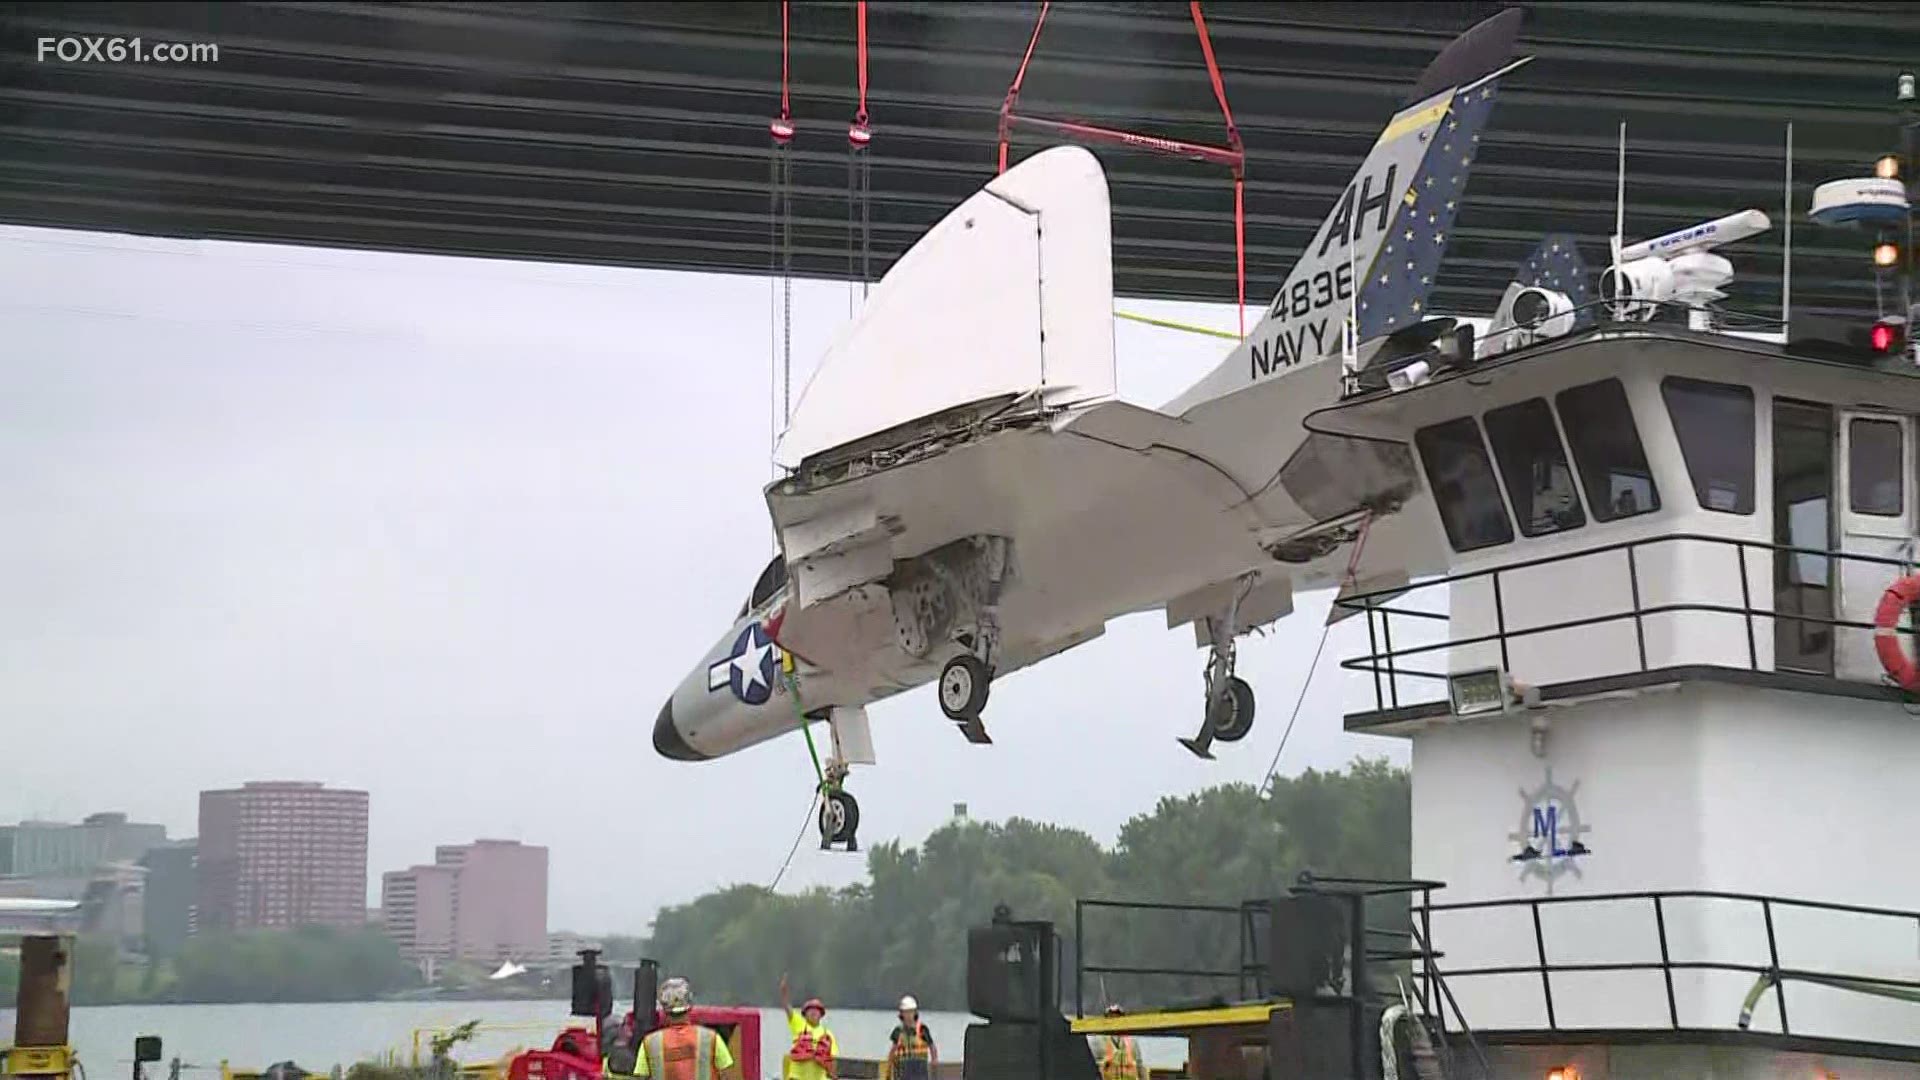 The aircraft was loaded by crane from a flatbed trailer onto a barge, where it will then set off down the Connecticut River